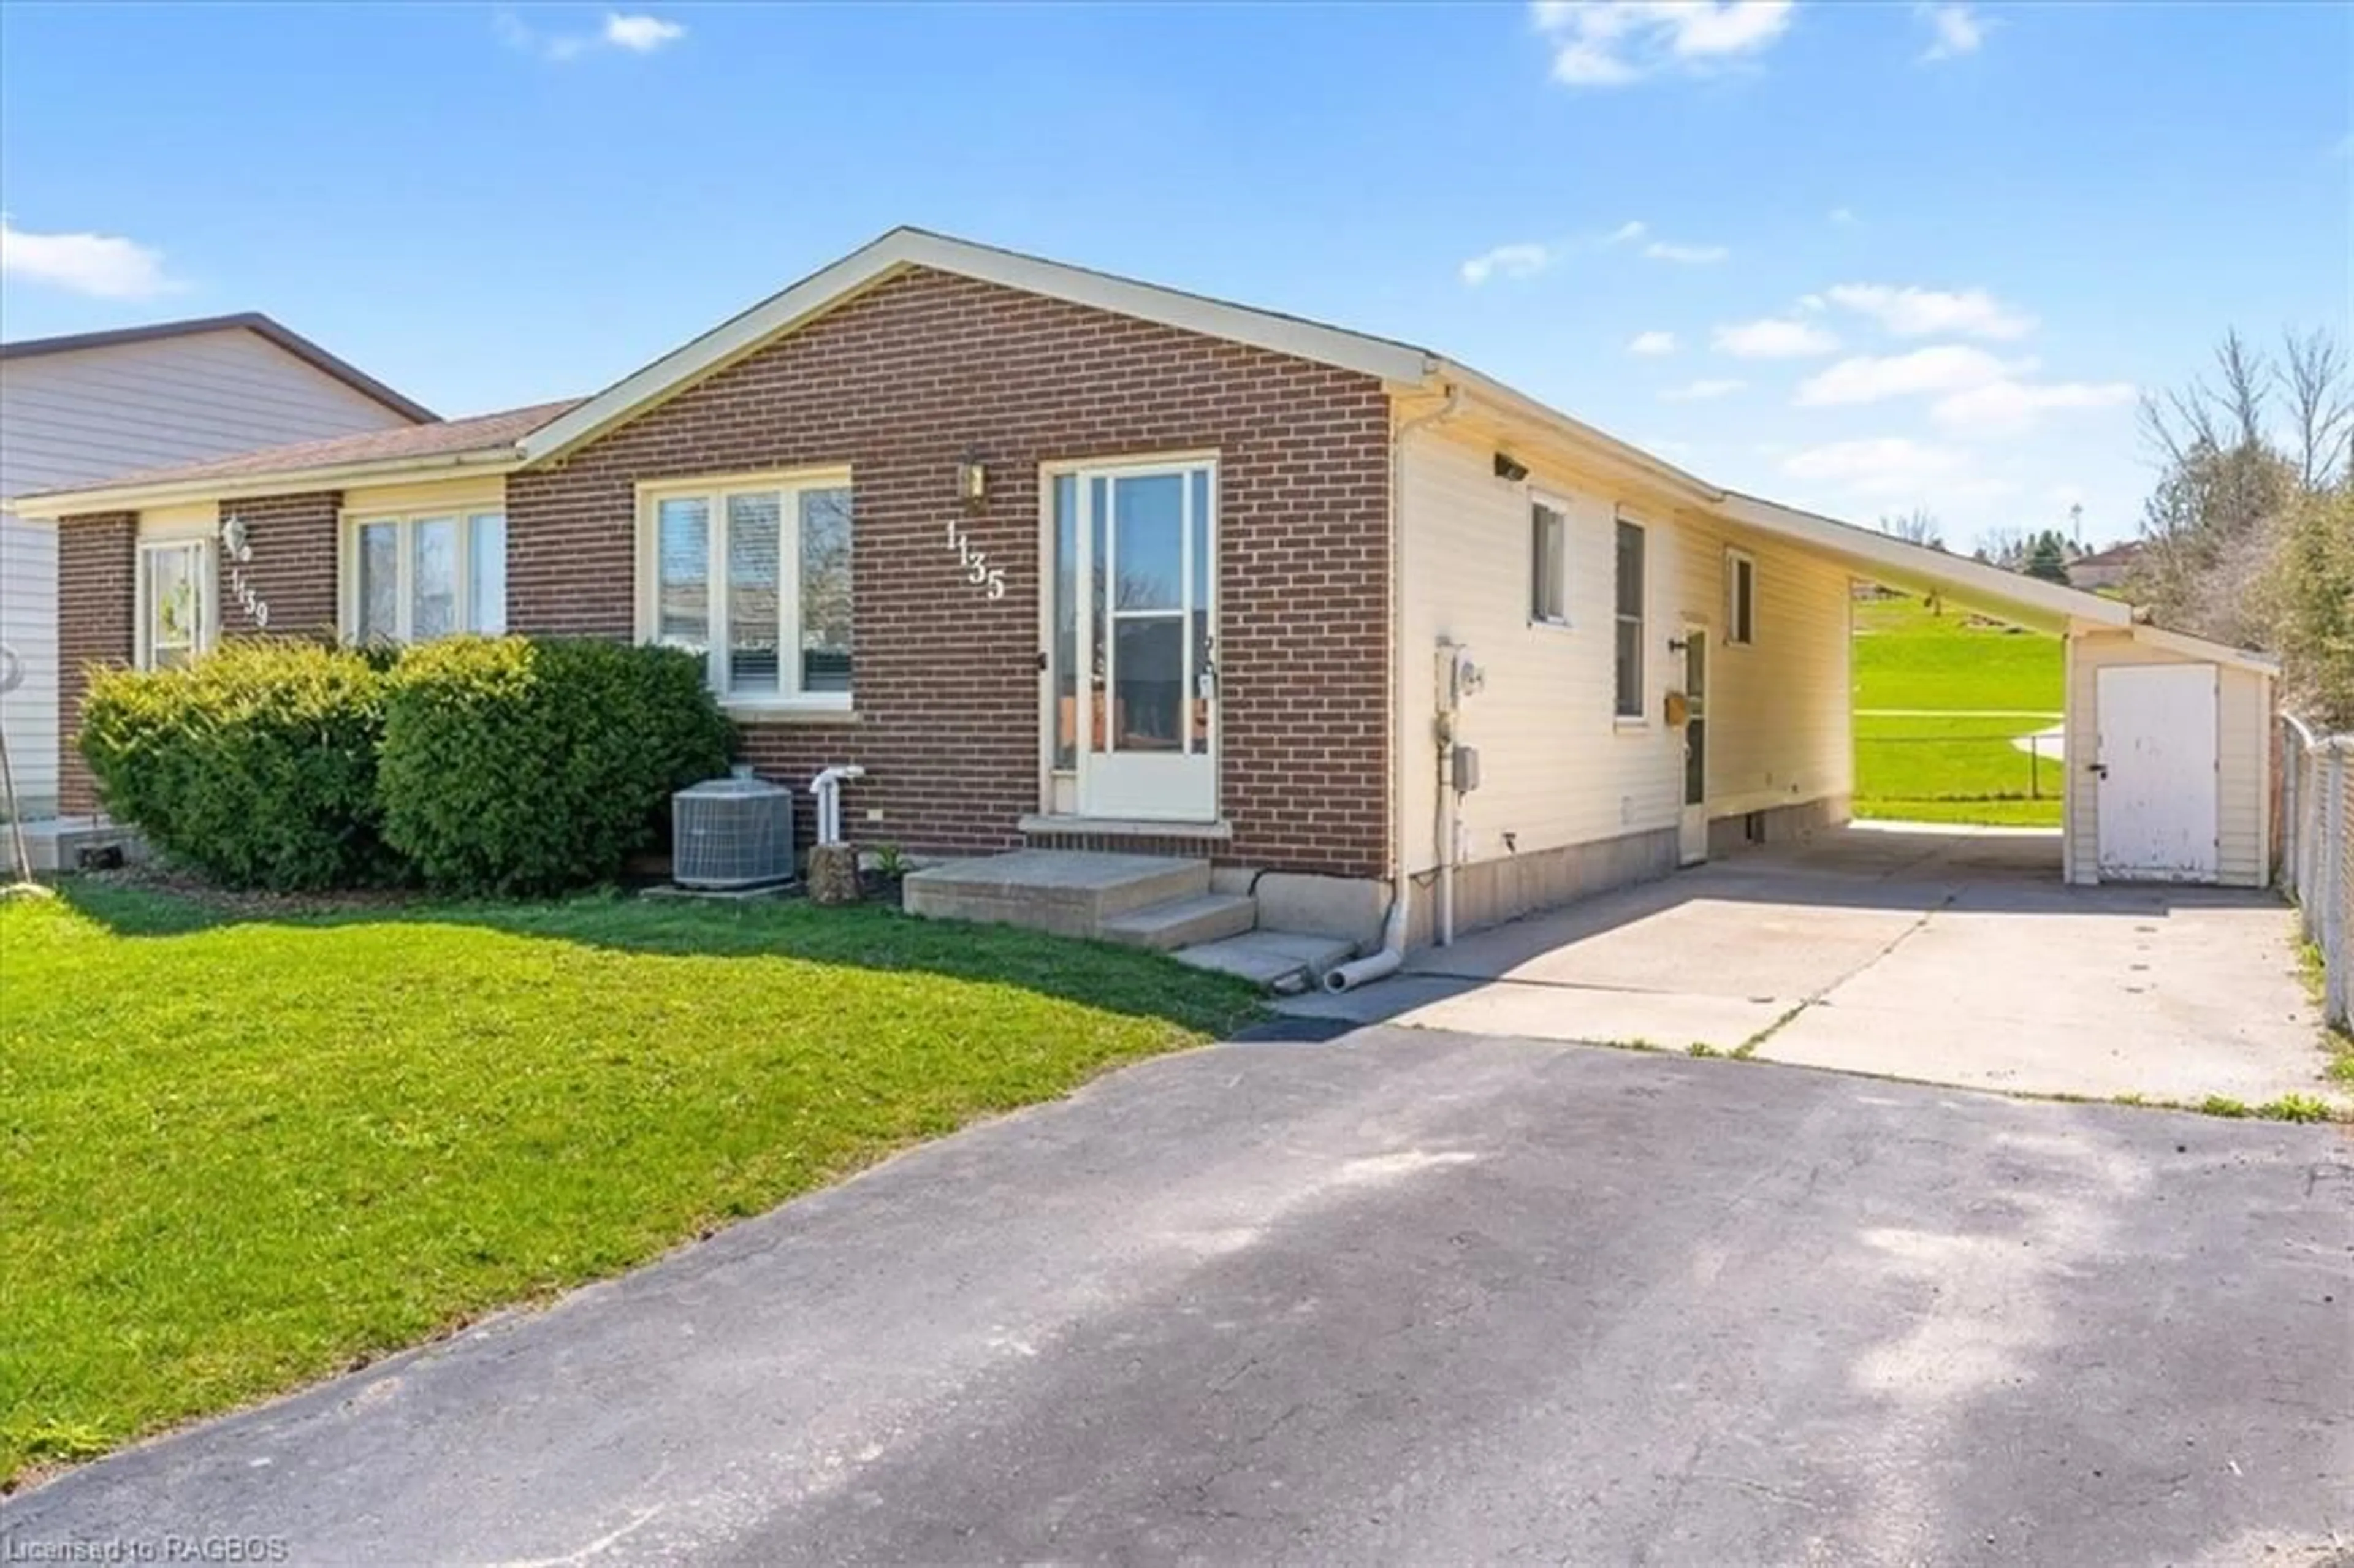 Frontside or backside of a home for 1135 12th St, Owen Sound Ontario N4K 6N2